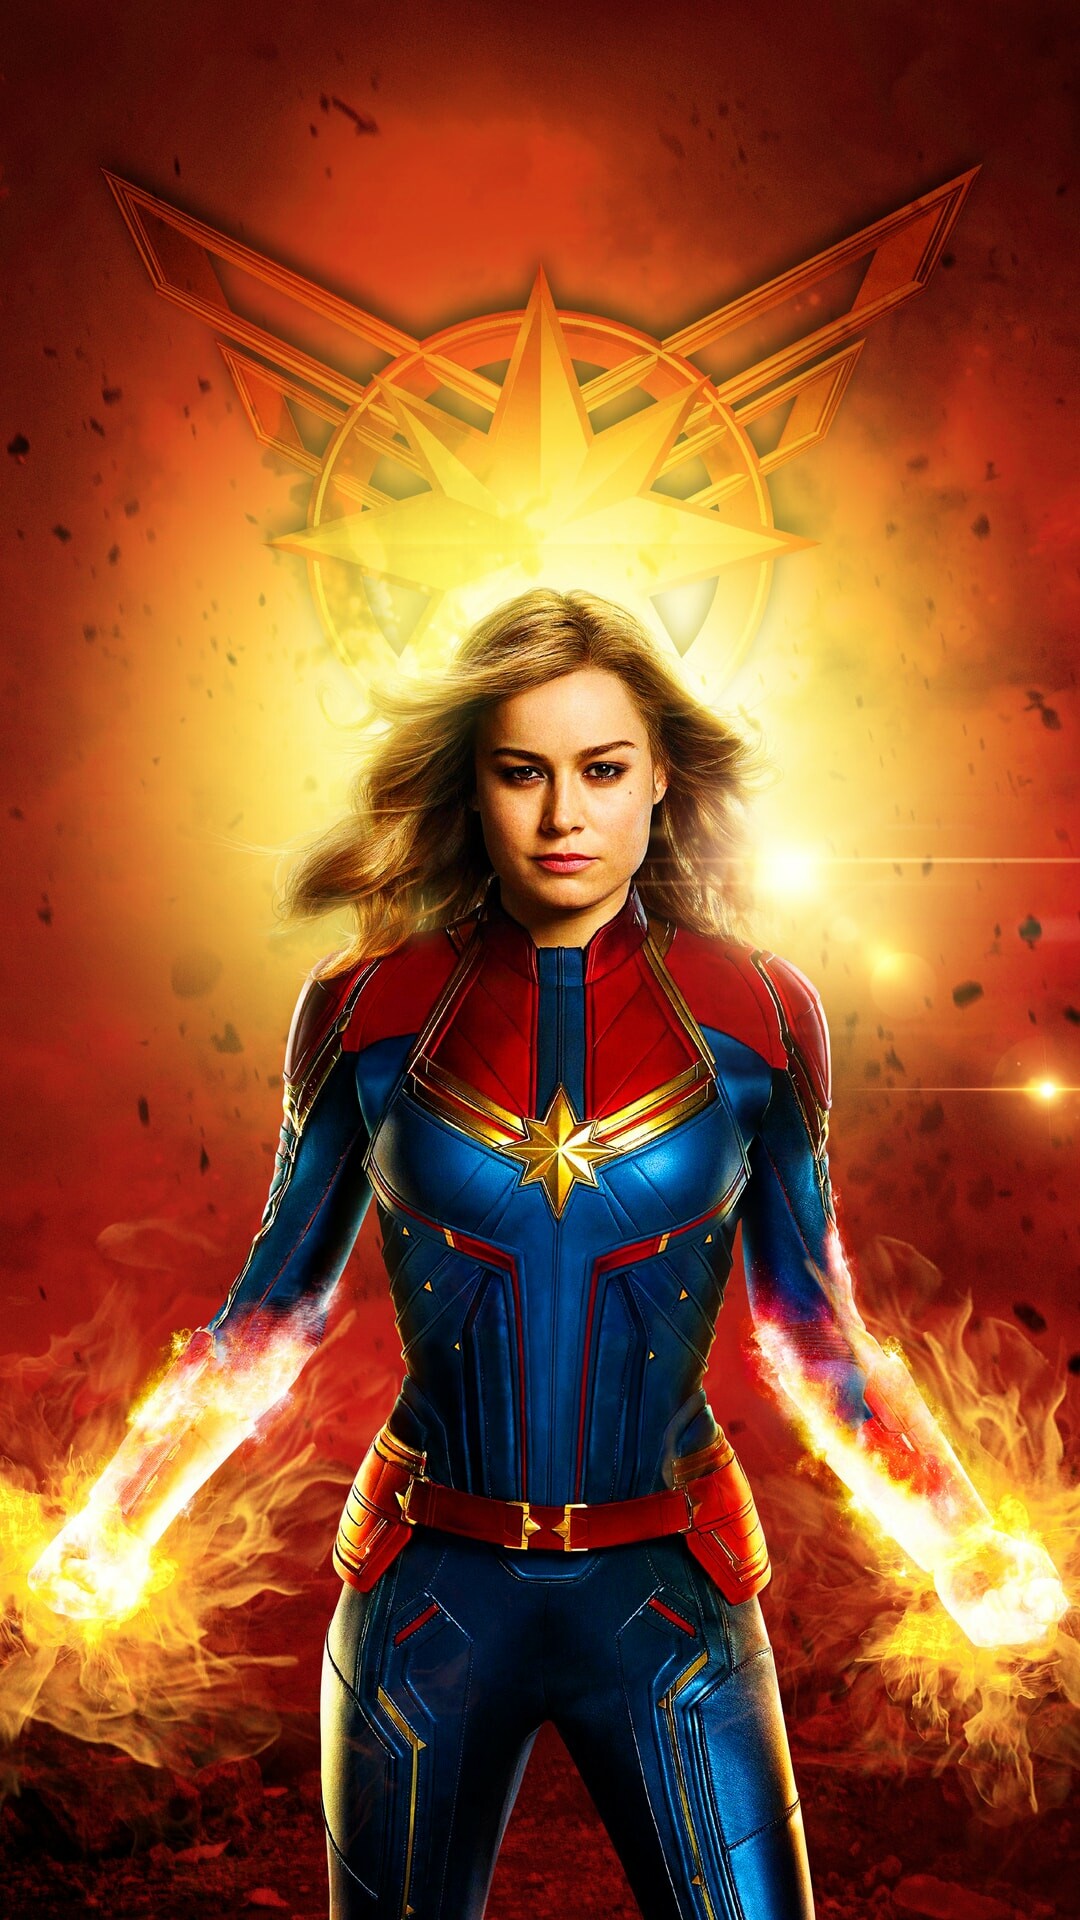 Captain Marvel: Brie Larson portrays Carol Danvers in the live-action Marvel Cinematic Universe films. 1080x1920 Full HD Background.